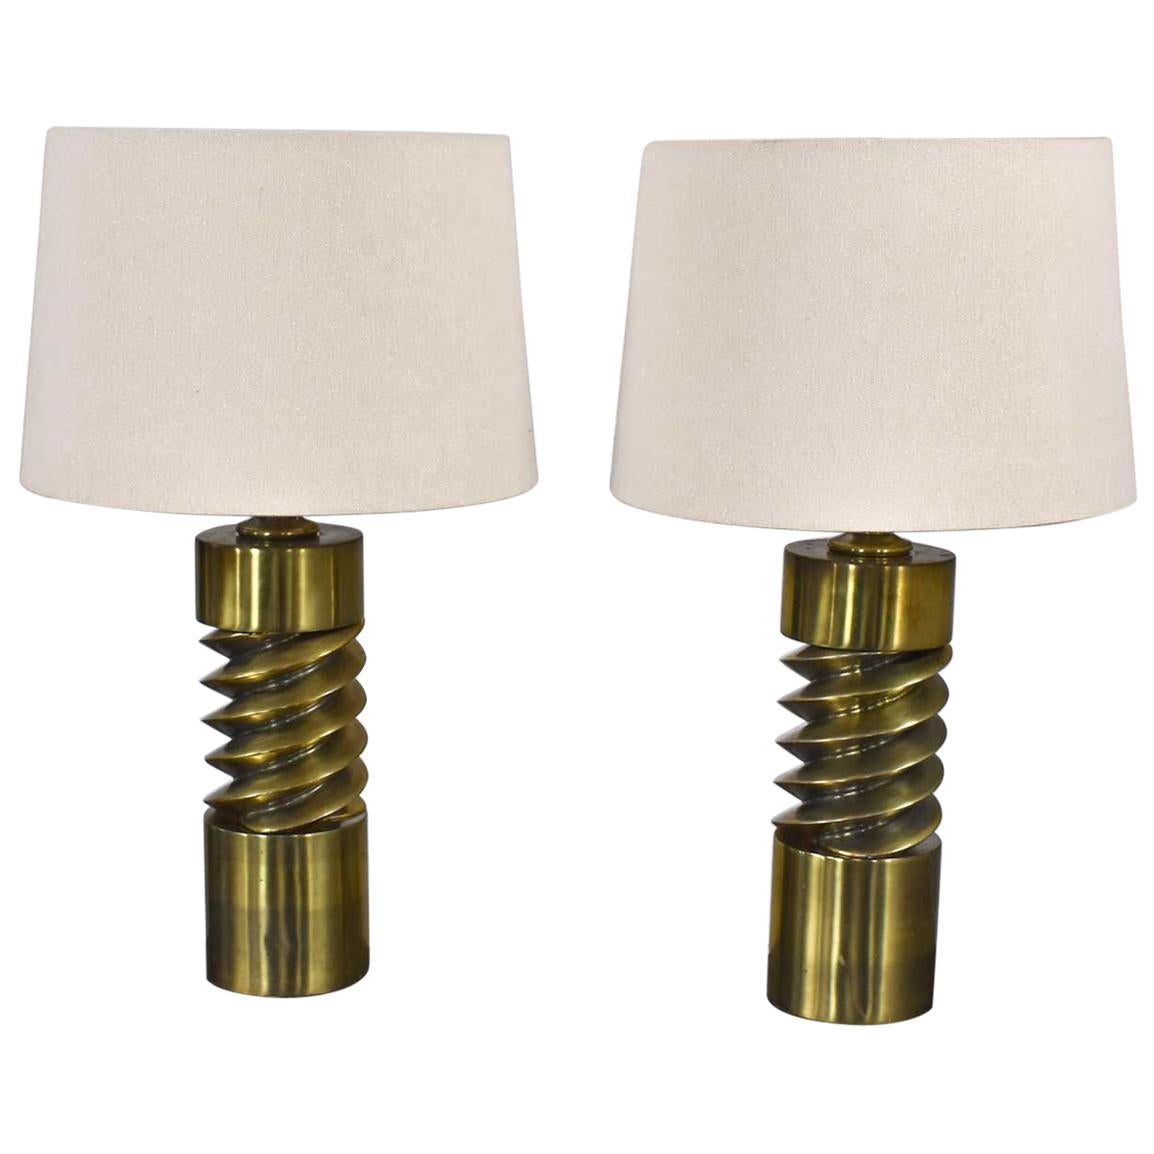 Vintage Mid-Century Modern Brass Plated Corkscrew Table Lamps New Shades a Pair